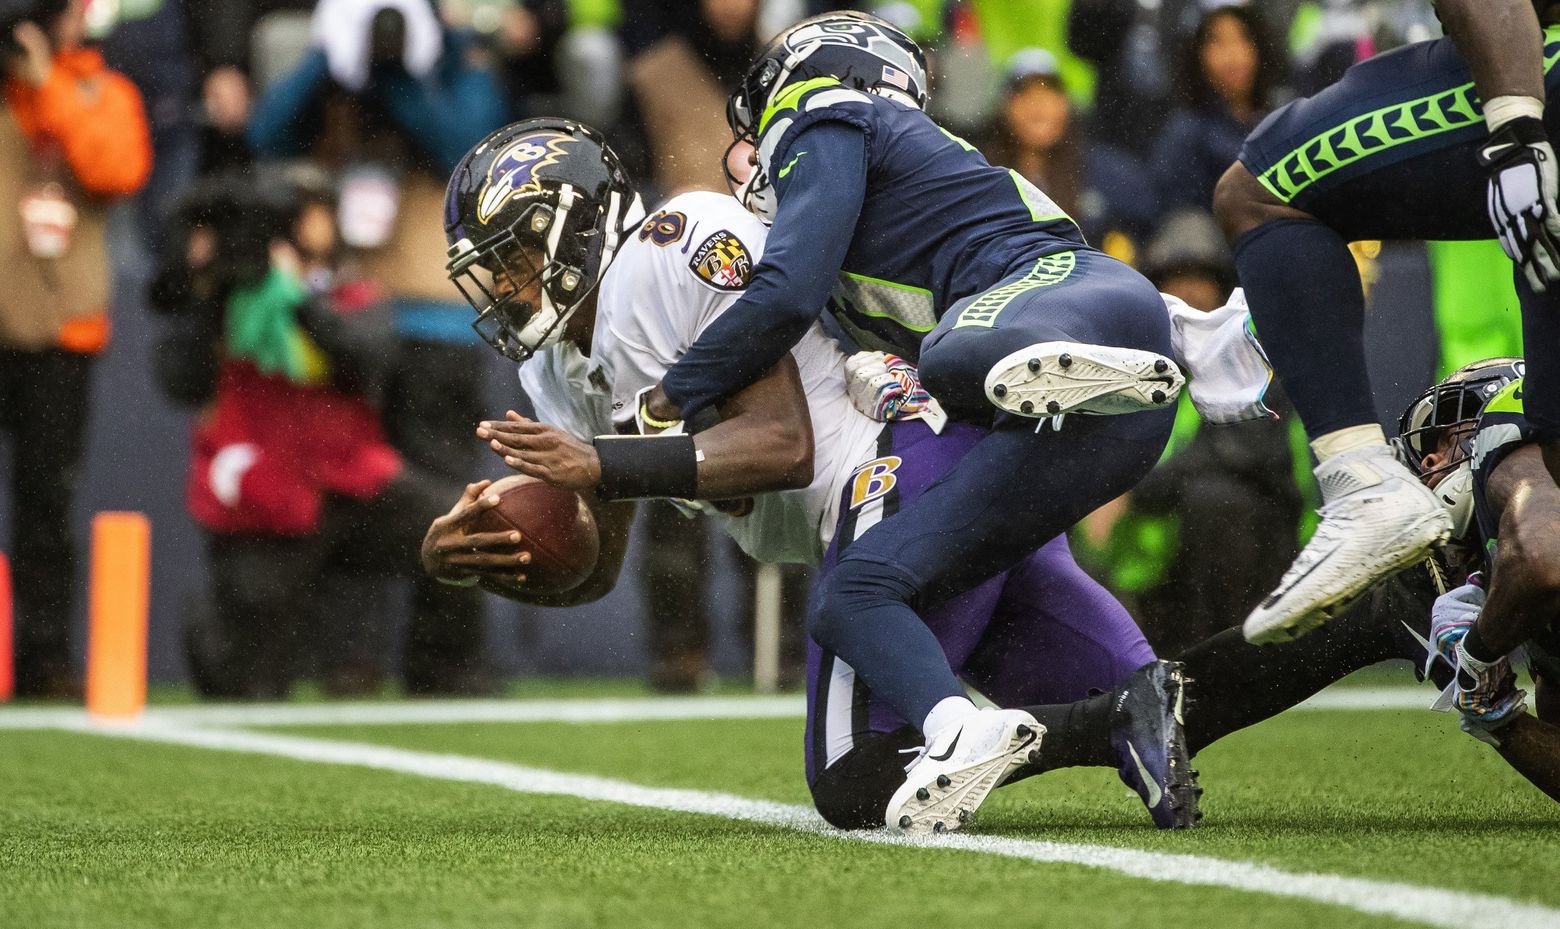 Instant analysis: Impressions from the Seahawks' Week 7 loss vs